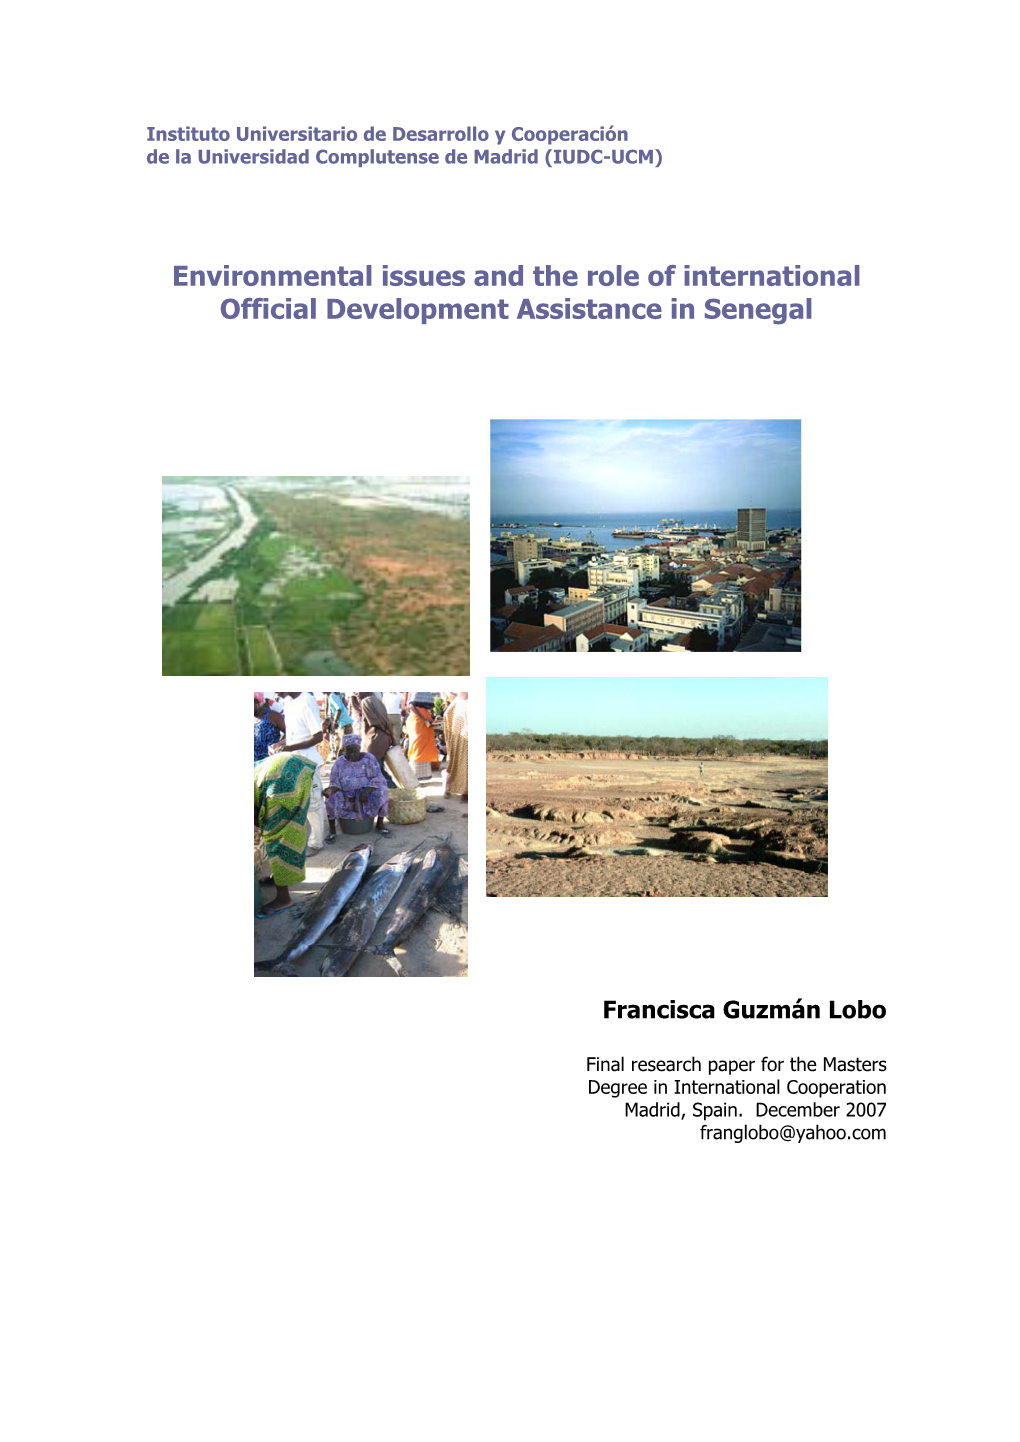 Environmental Issues and the Role of International Official Development Assistance in Senegal